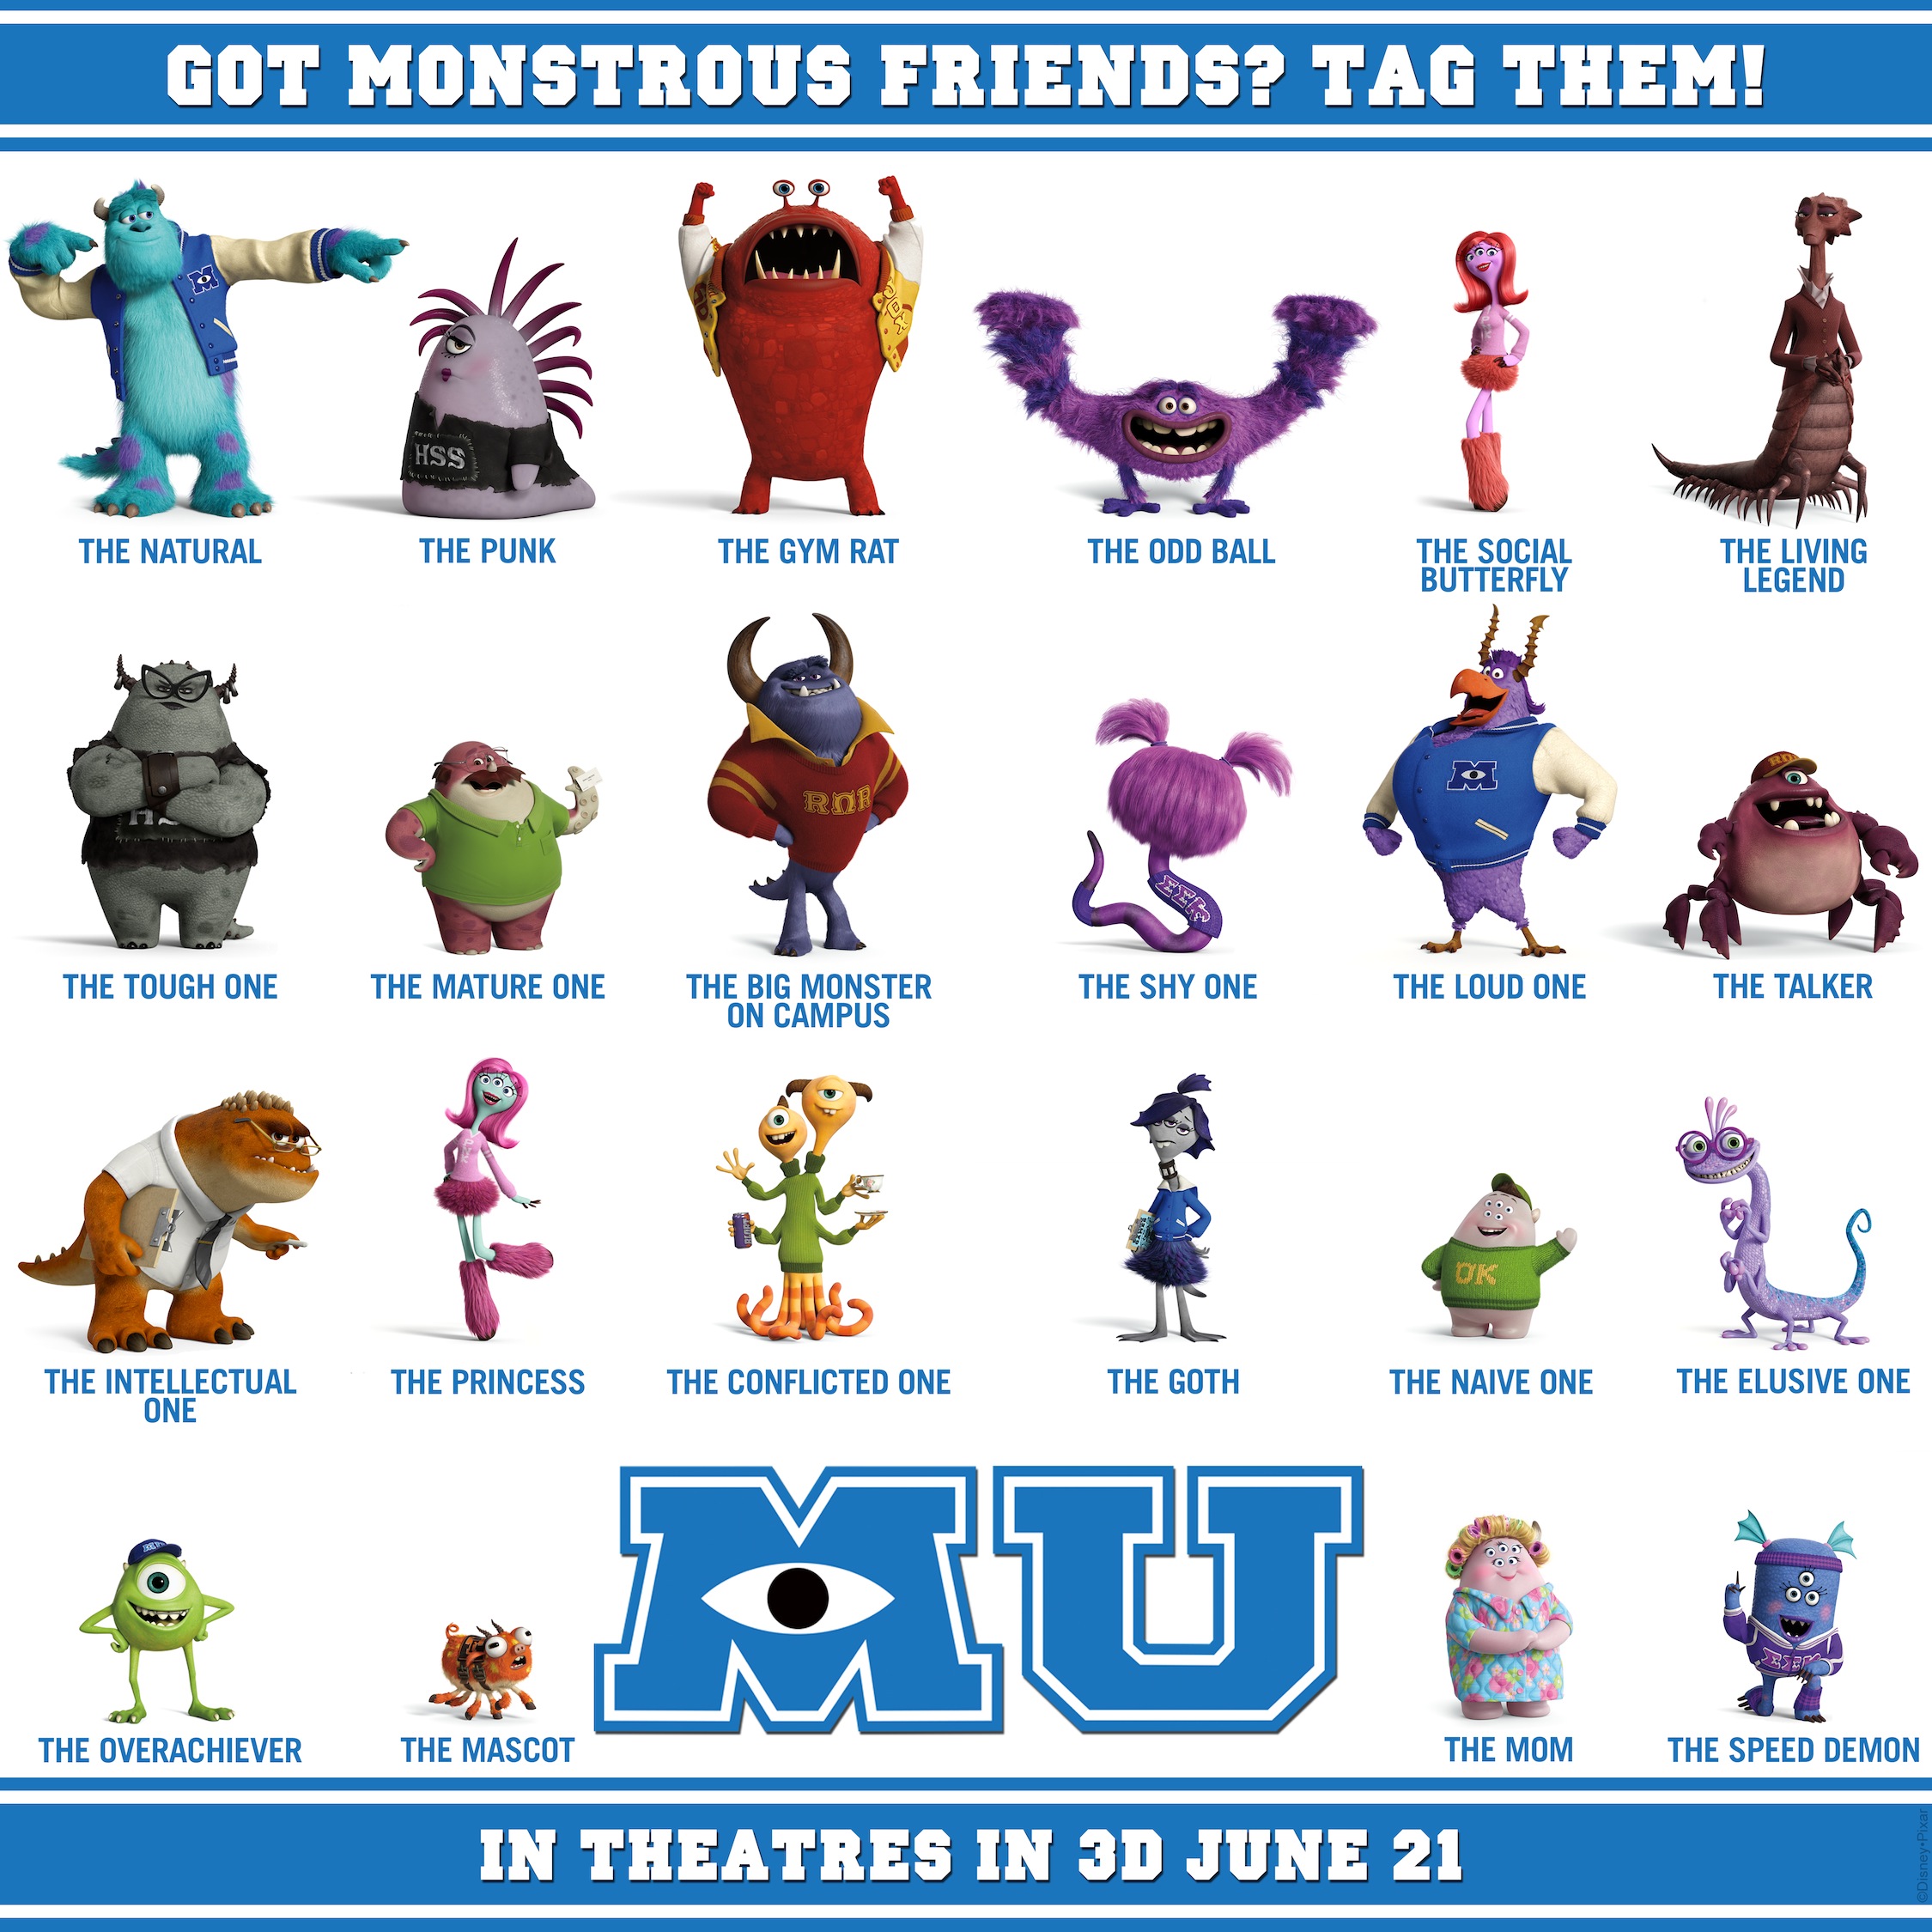 The Scarers of Monsters Inc. — The Disney Classics, monsters inc characters